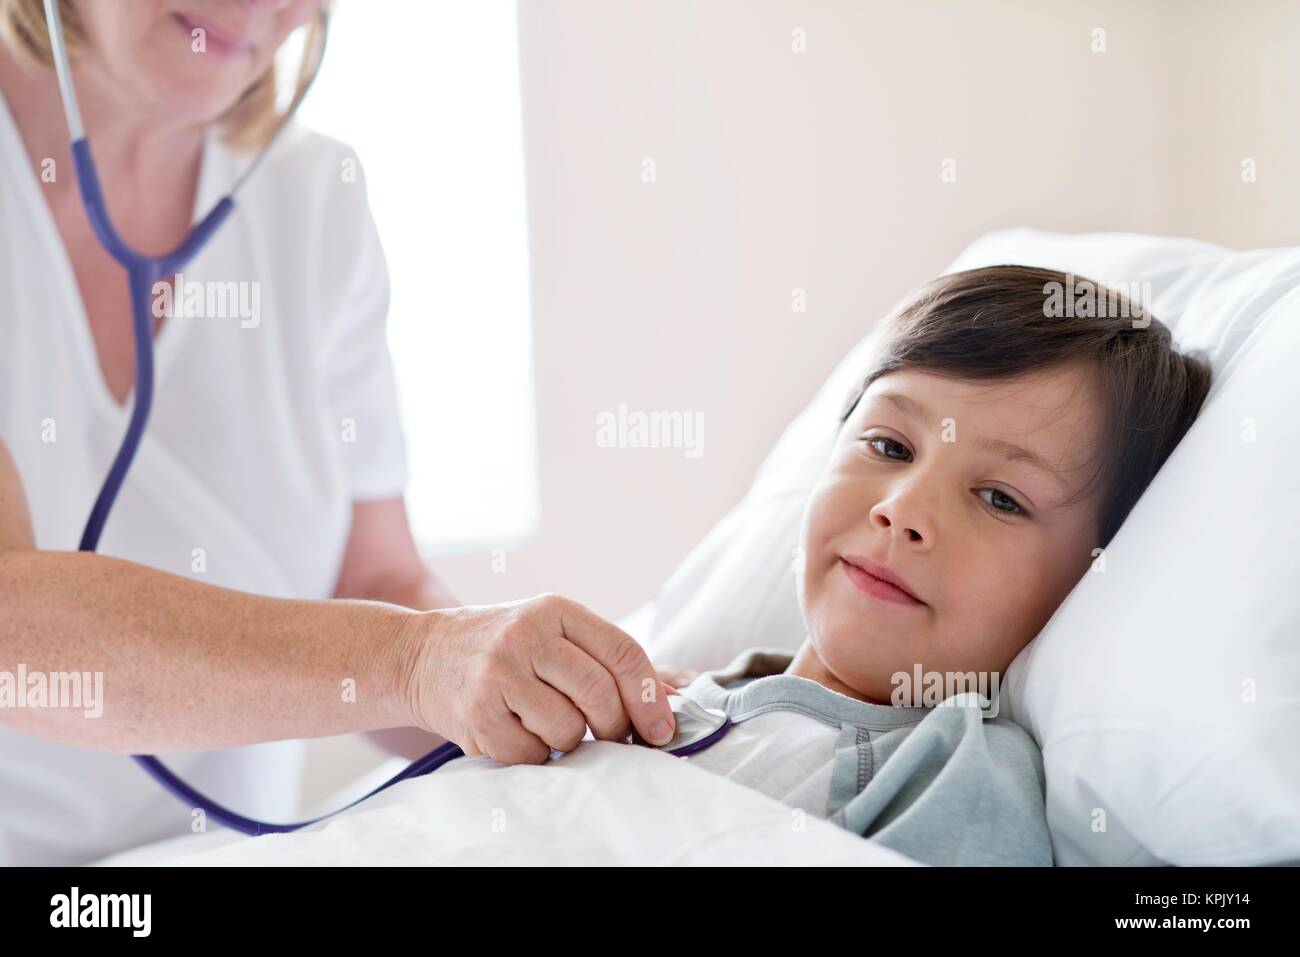 Young boy in hospital bed, nurse using stethoscope. Stock Photo